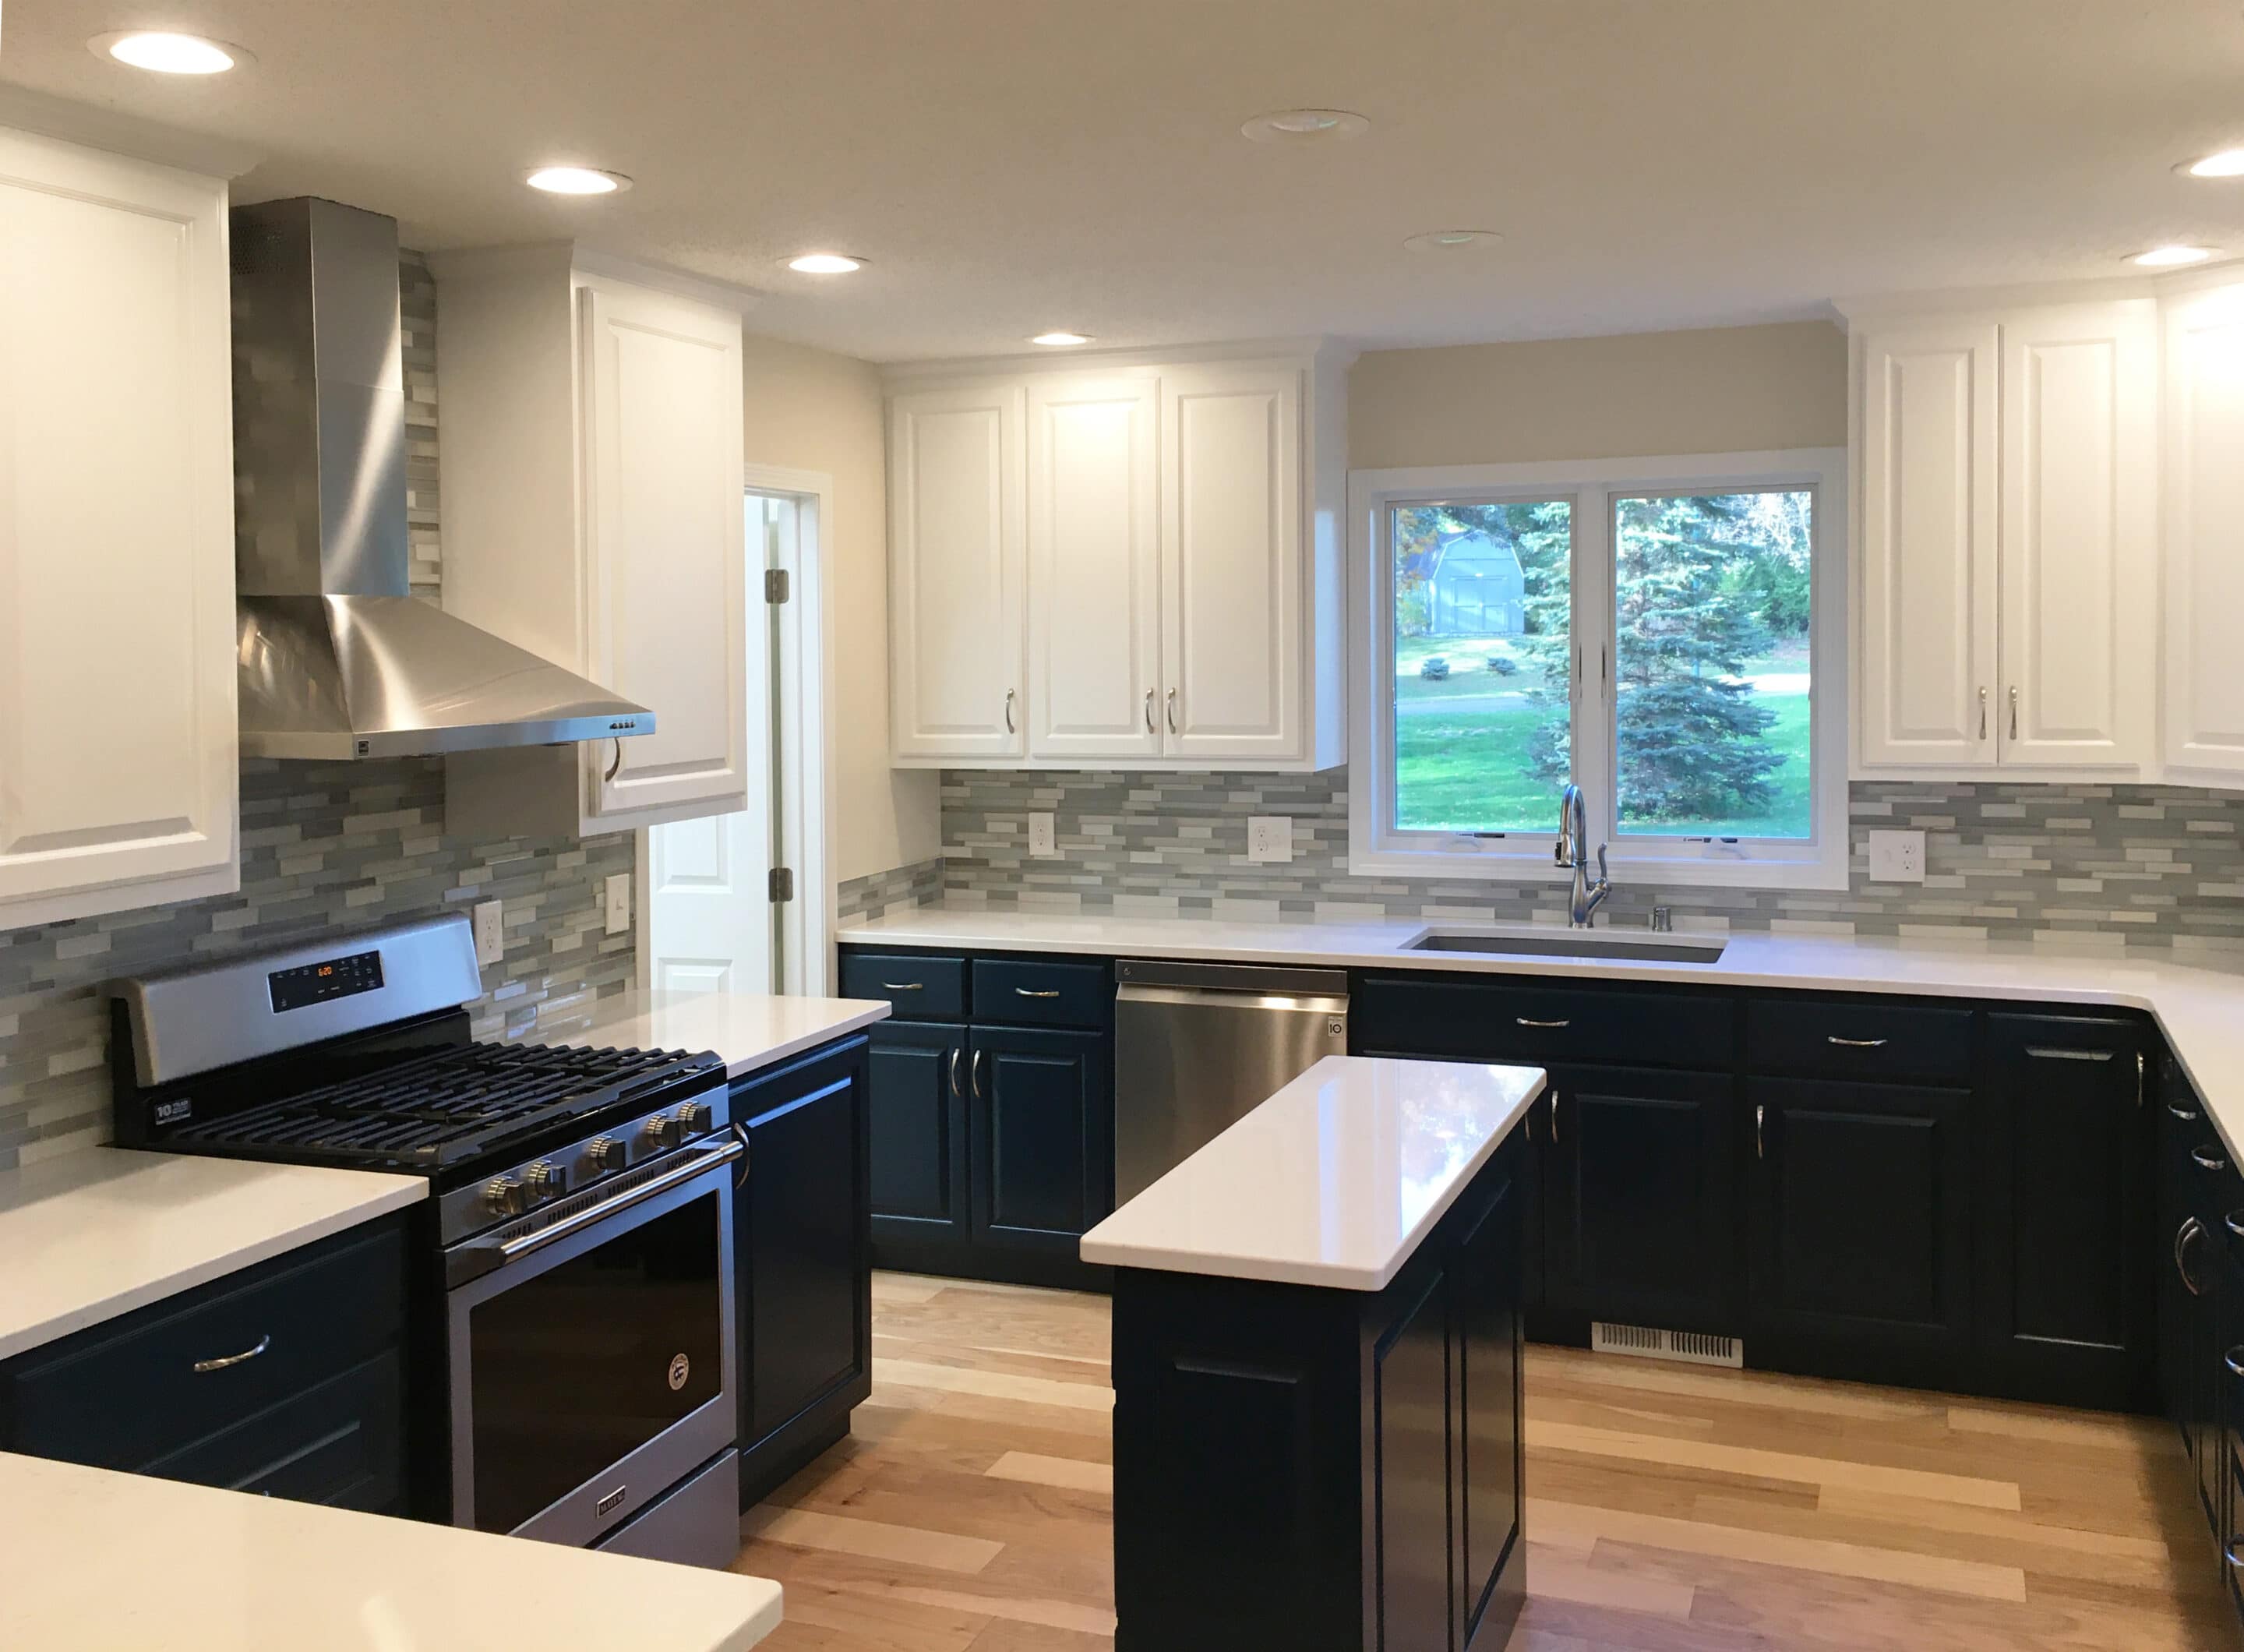 Kitchen remodel featuring contrasting cabinets